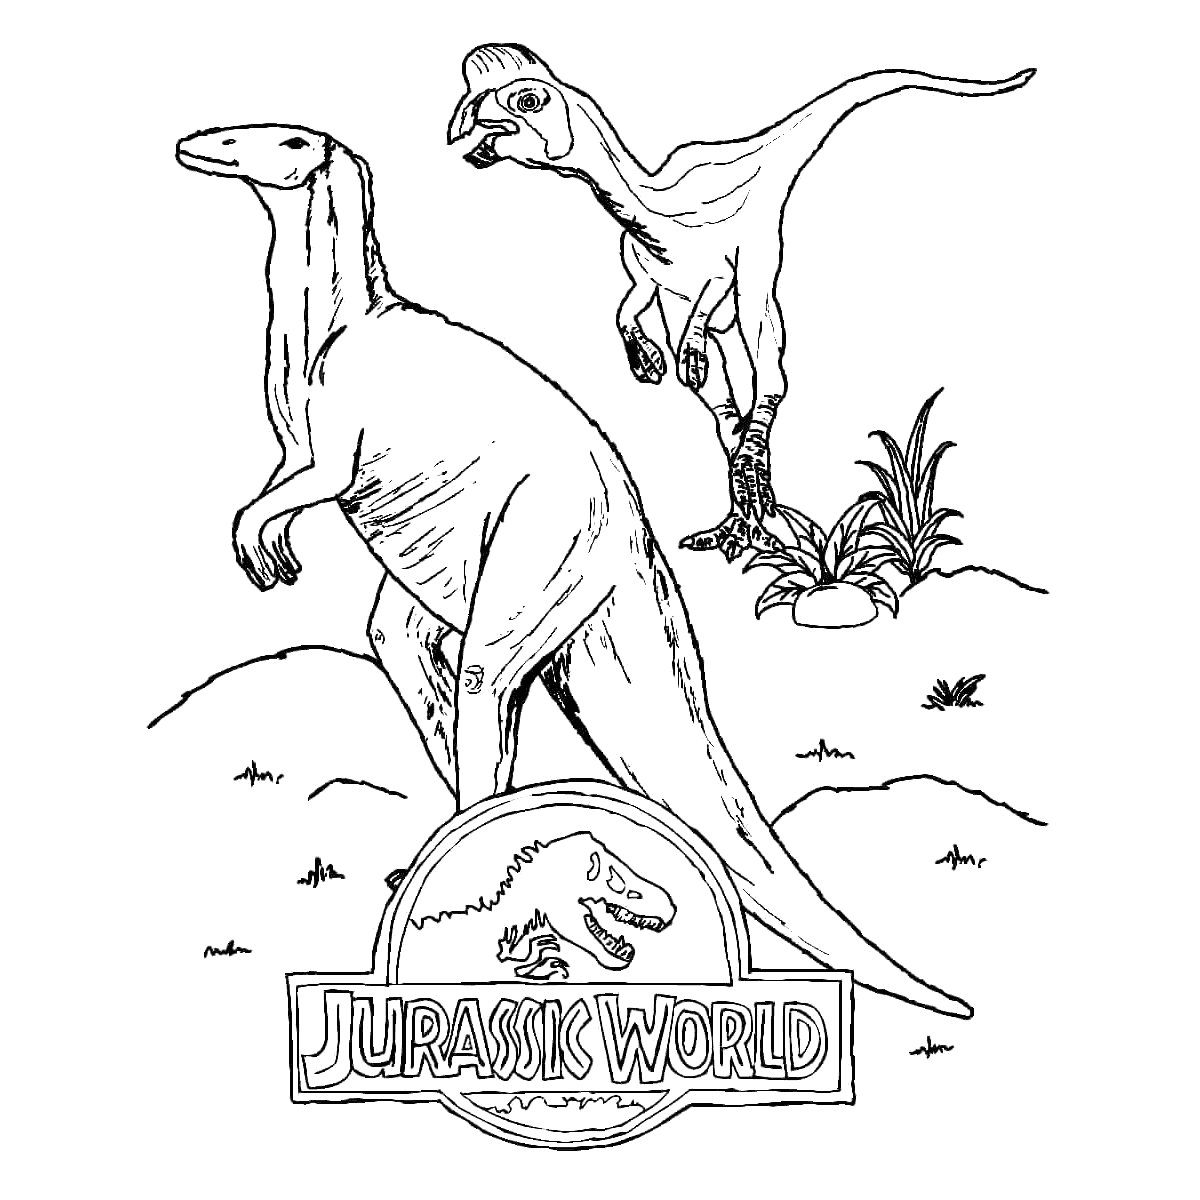 jurassic world 2 coloring pages